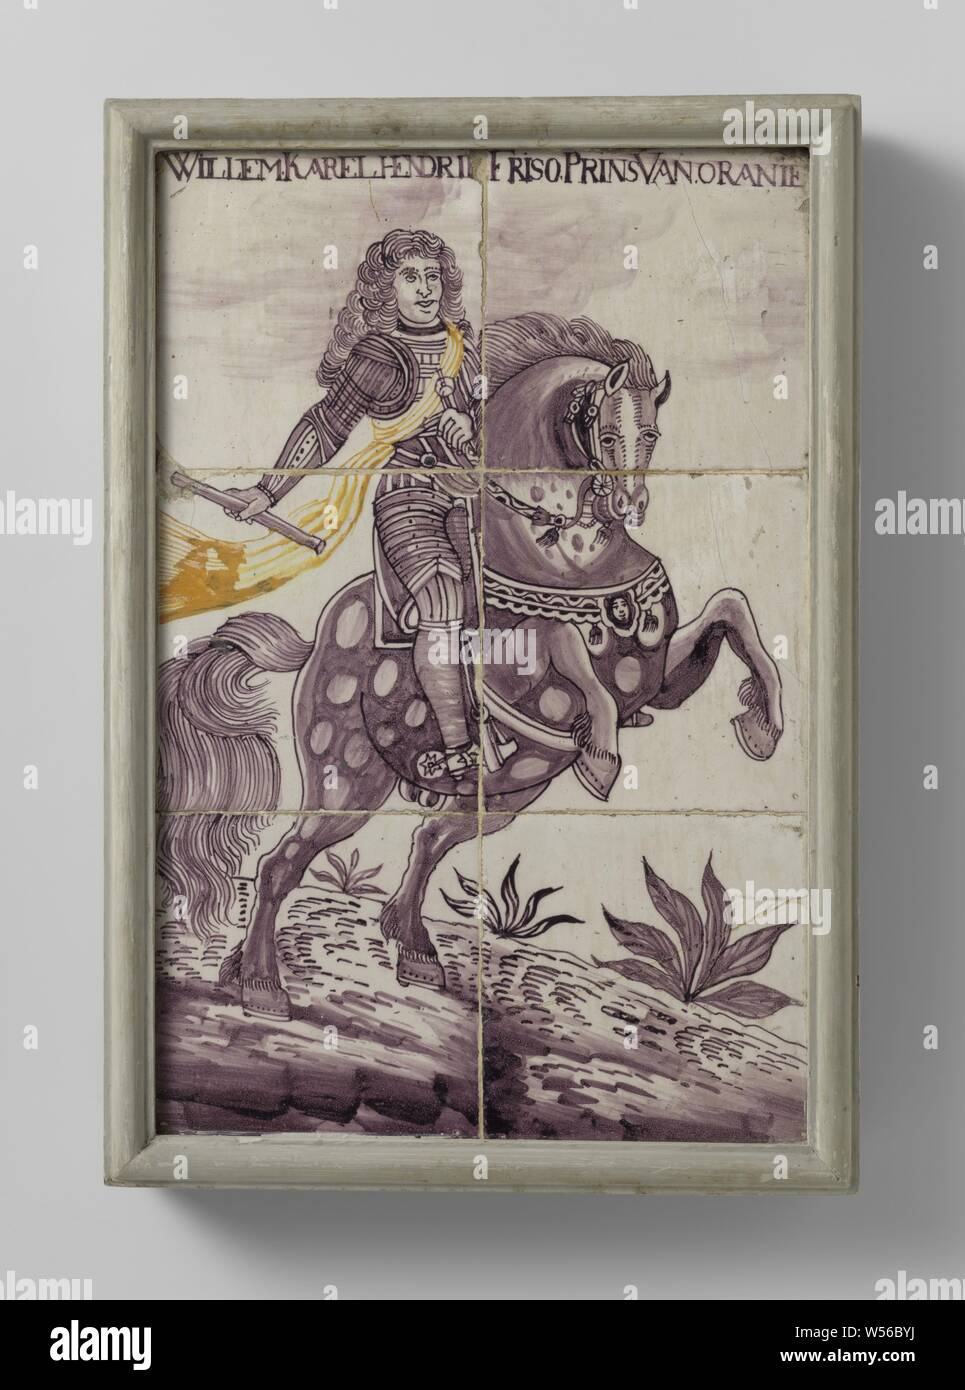 Tile panel with portrait Prince William IV on horseback, with inscription: WILLEM KAREL HENDRIK FRISO PRINCE OF ORANY, Tile panel of 6 tiles (3 x 2) with a multi-colored (purple and yellow) portrait of Prince William IV painted by horse. At the top, the inscription: WILLEM KAREL HENDRIK FRISO PRINCE OF ORANIA, William IV (Prince of Orange-Nassau), anonymous, Netherlands, 1760 - 1795, earthenware, tin glaze, h 42.5 cm × w 29 cm × d 5 cm Stock Photo